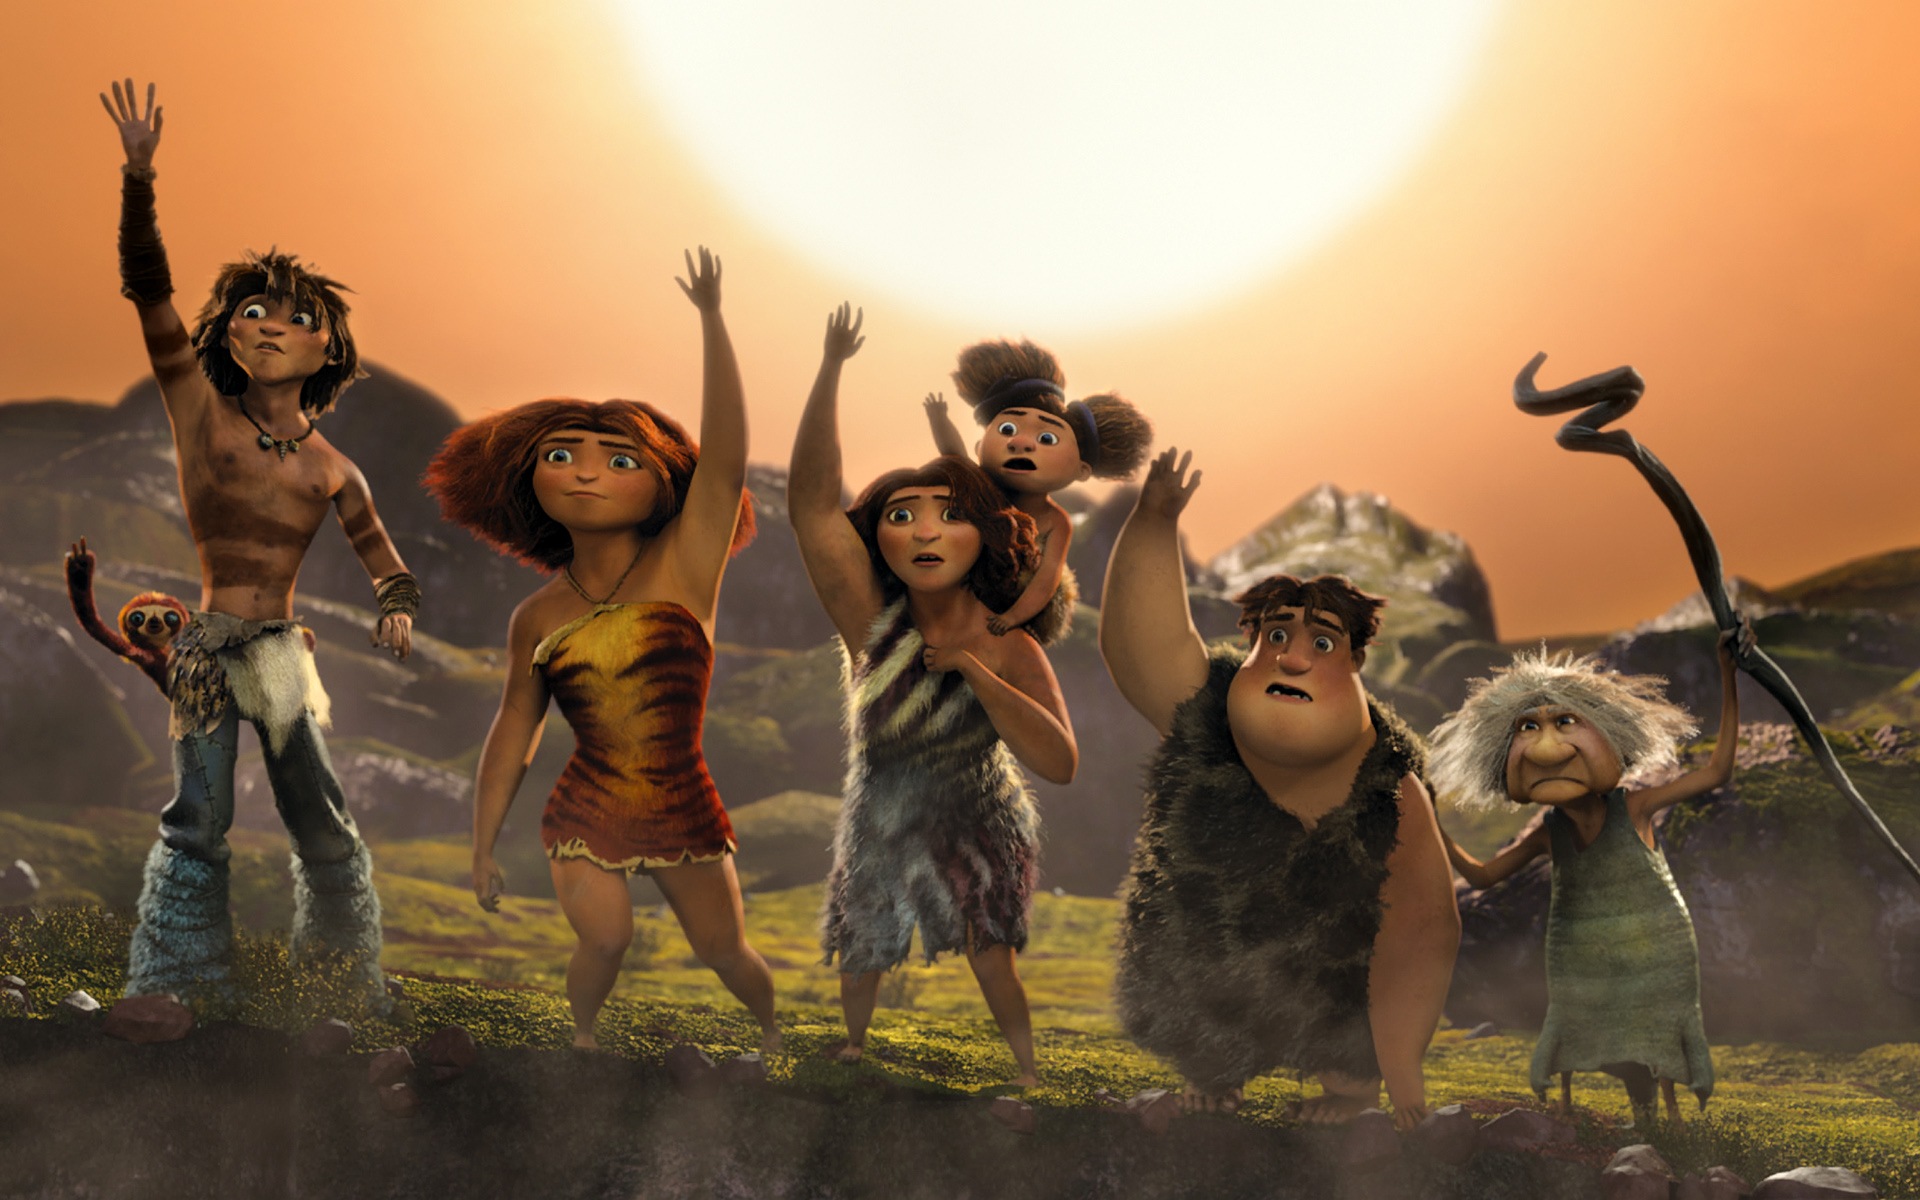 The Croods HD movie wallpapers #4 - 1920x1200